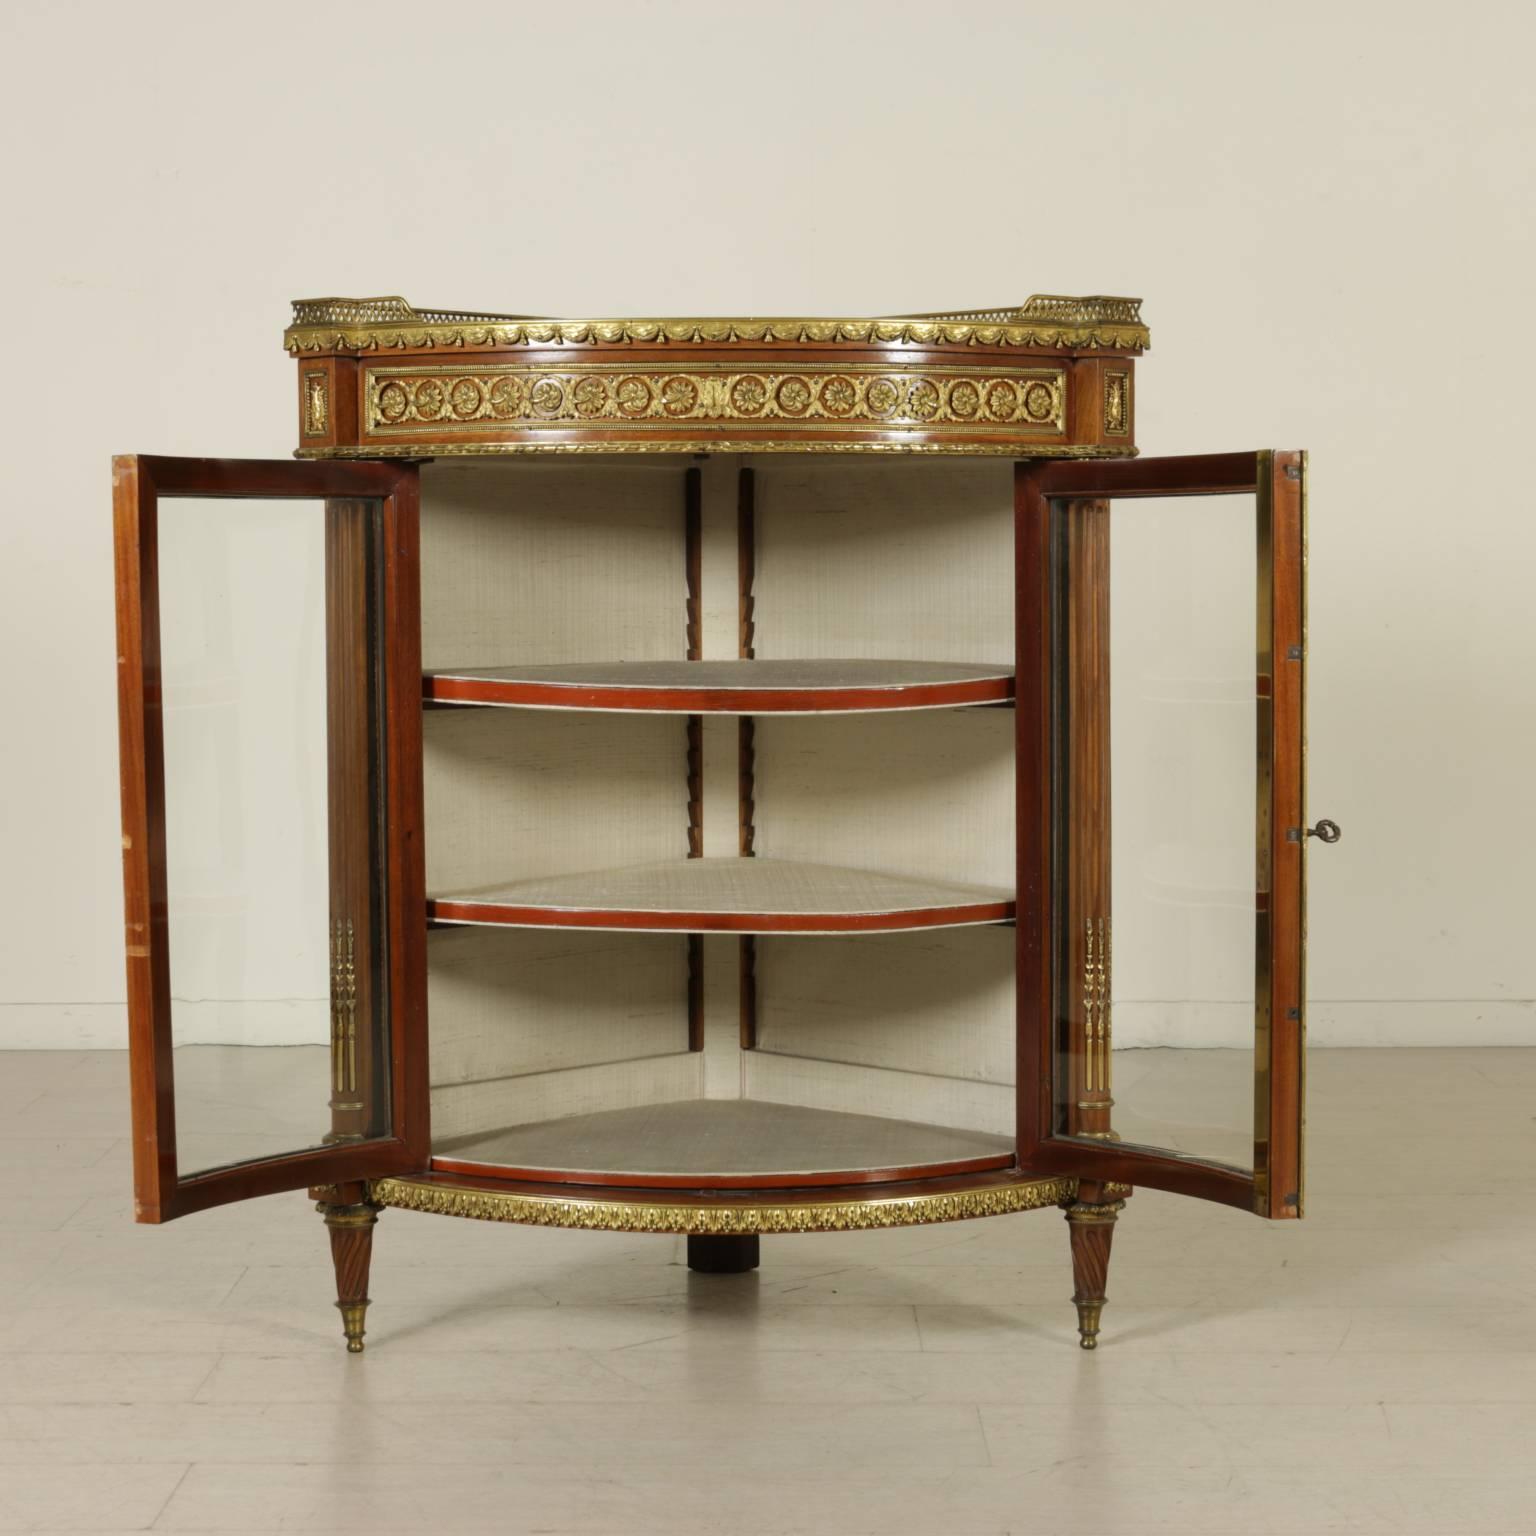 A semicircular solid mahogany corner cabinet with two doors with glasses, truncated conical feet with helical groove, half columns on the uprights, marble top enclosed by a curtain-shaped gilded bronze small baluster. The cabinet is enriched by